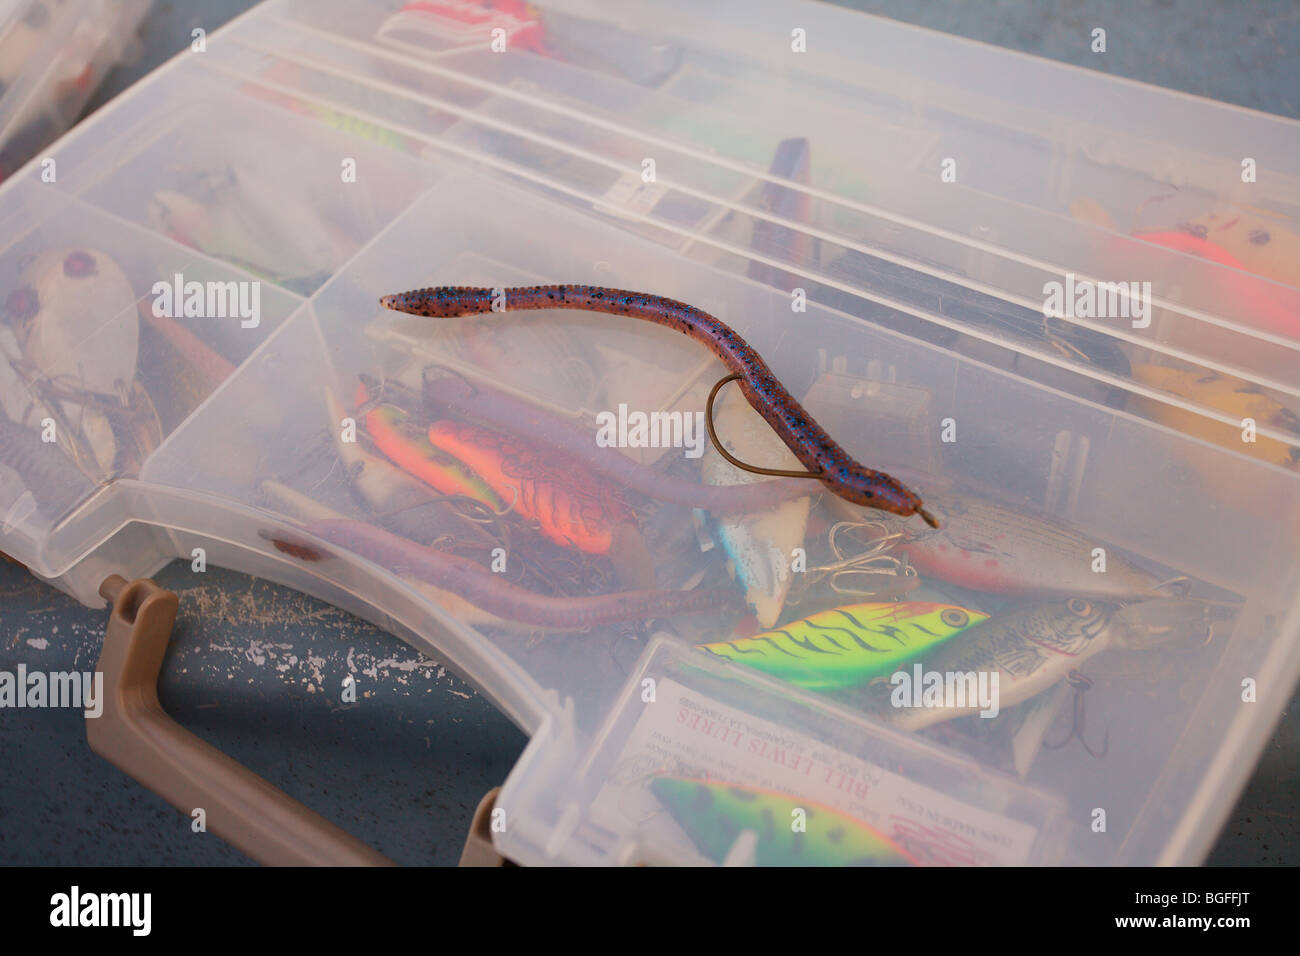 plastic worm fishing lure sitting on clear plastic tackle box fishing sport Stock Photo